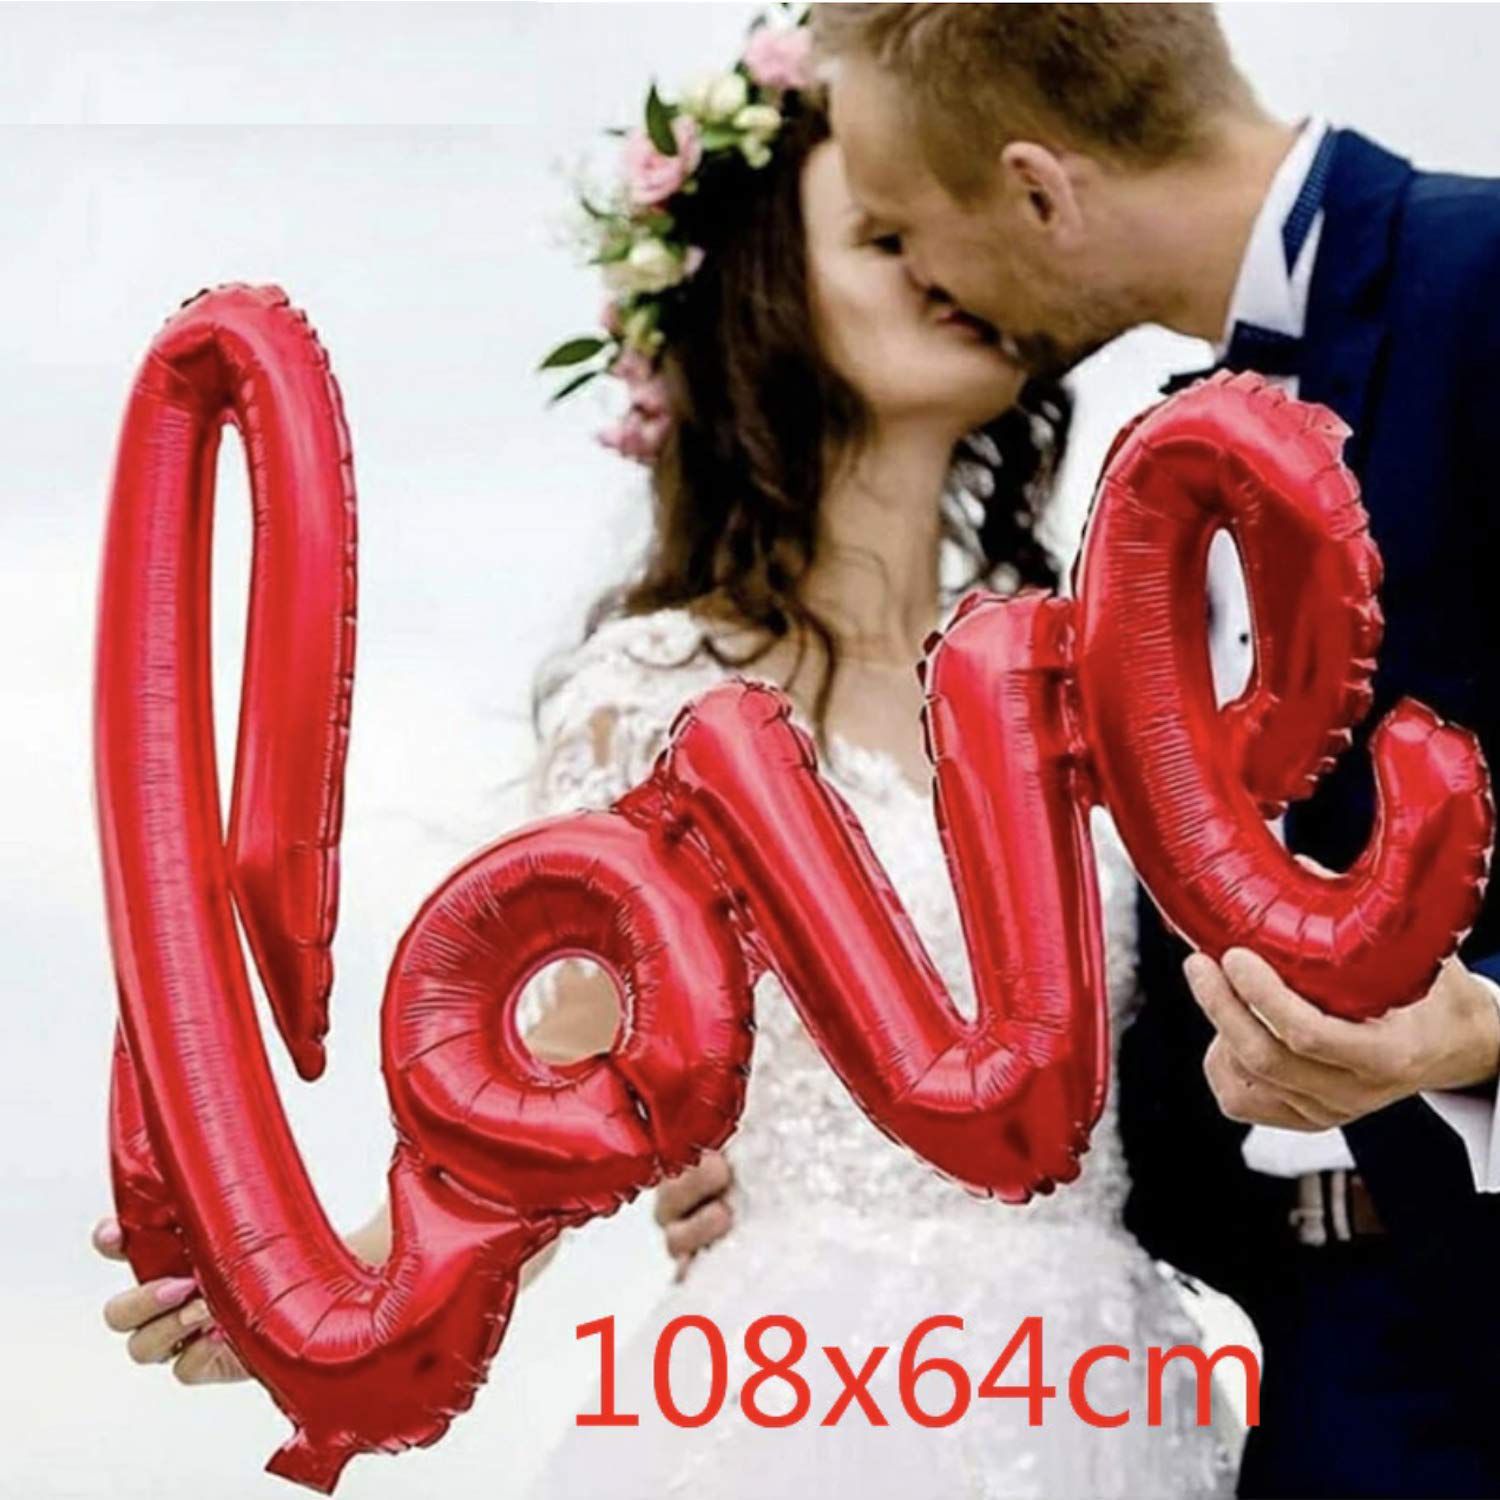 Red Love Balloon Wedding Decoration For Home Balloon